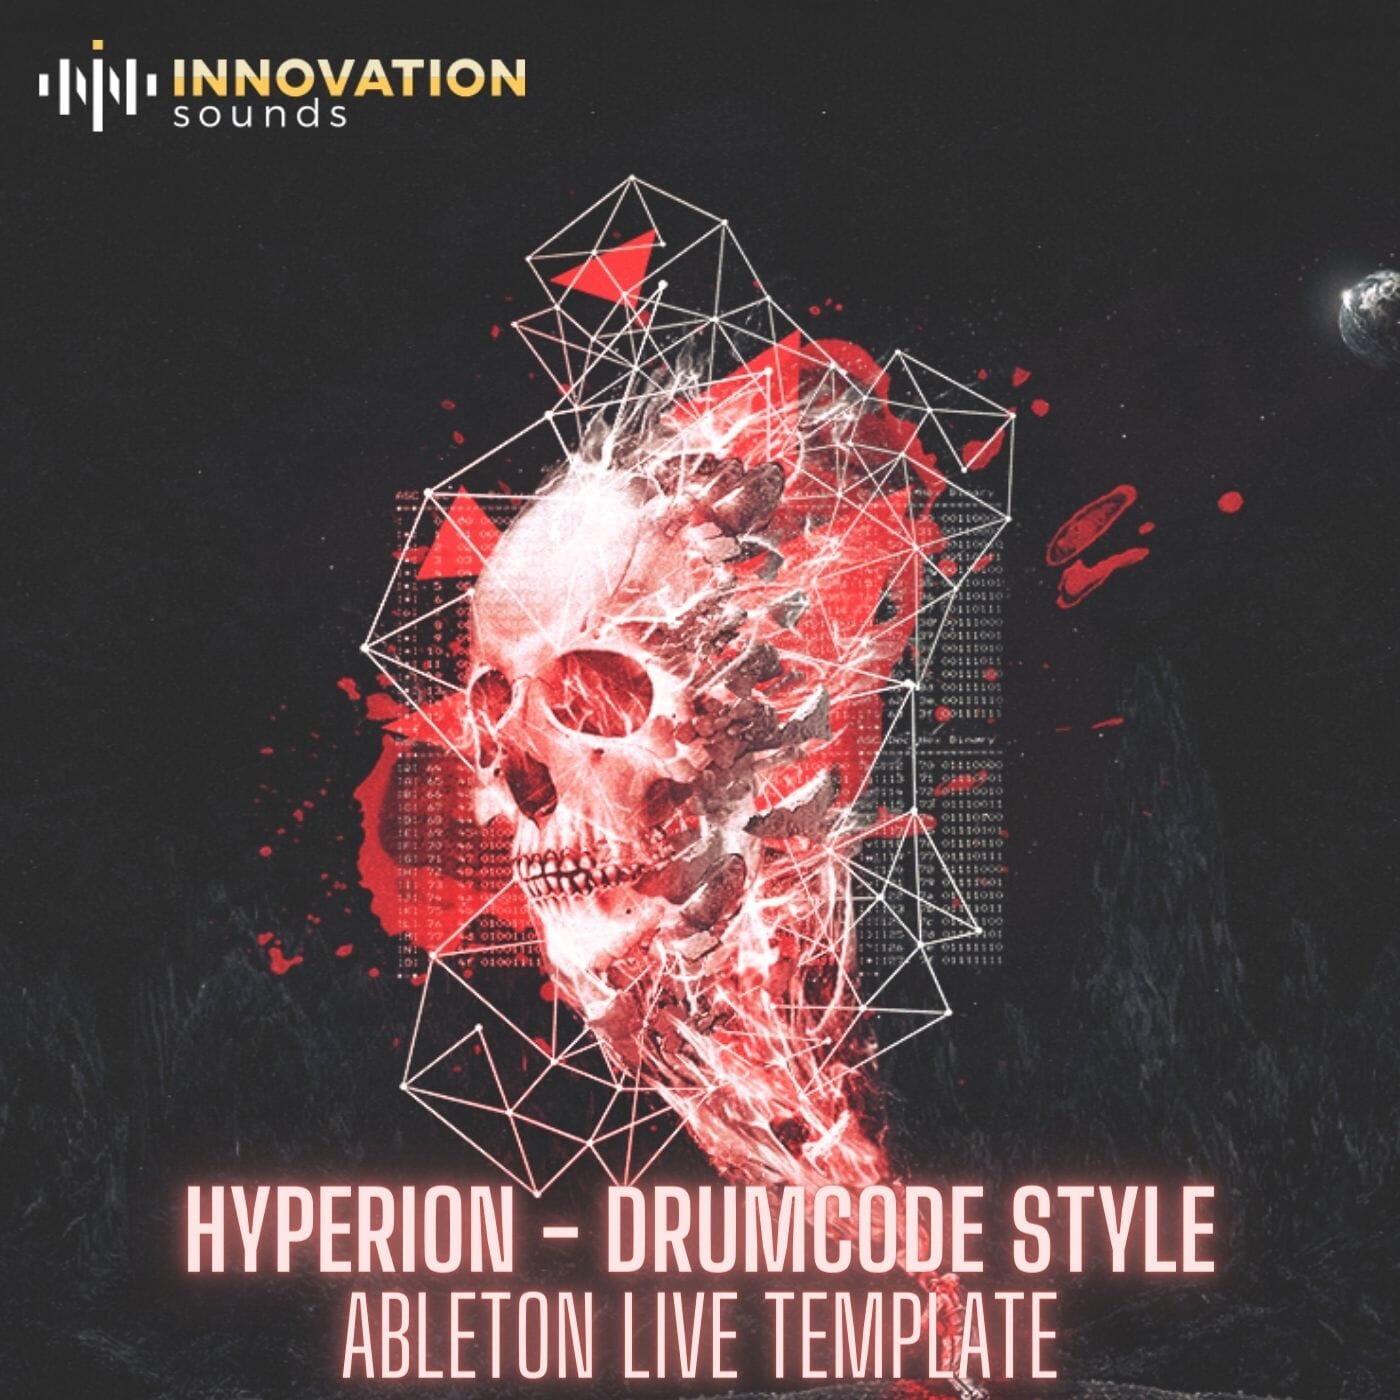 Hyperion - Drumcode Style Ableton 10 Techno Template Sample Pack Innovation Sounds